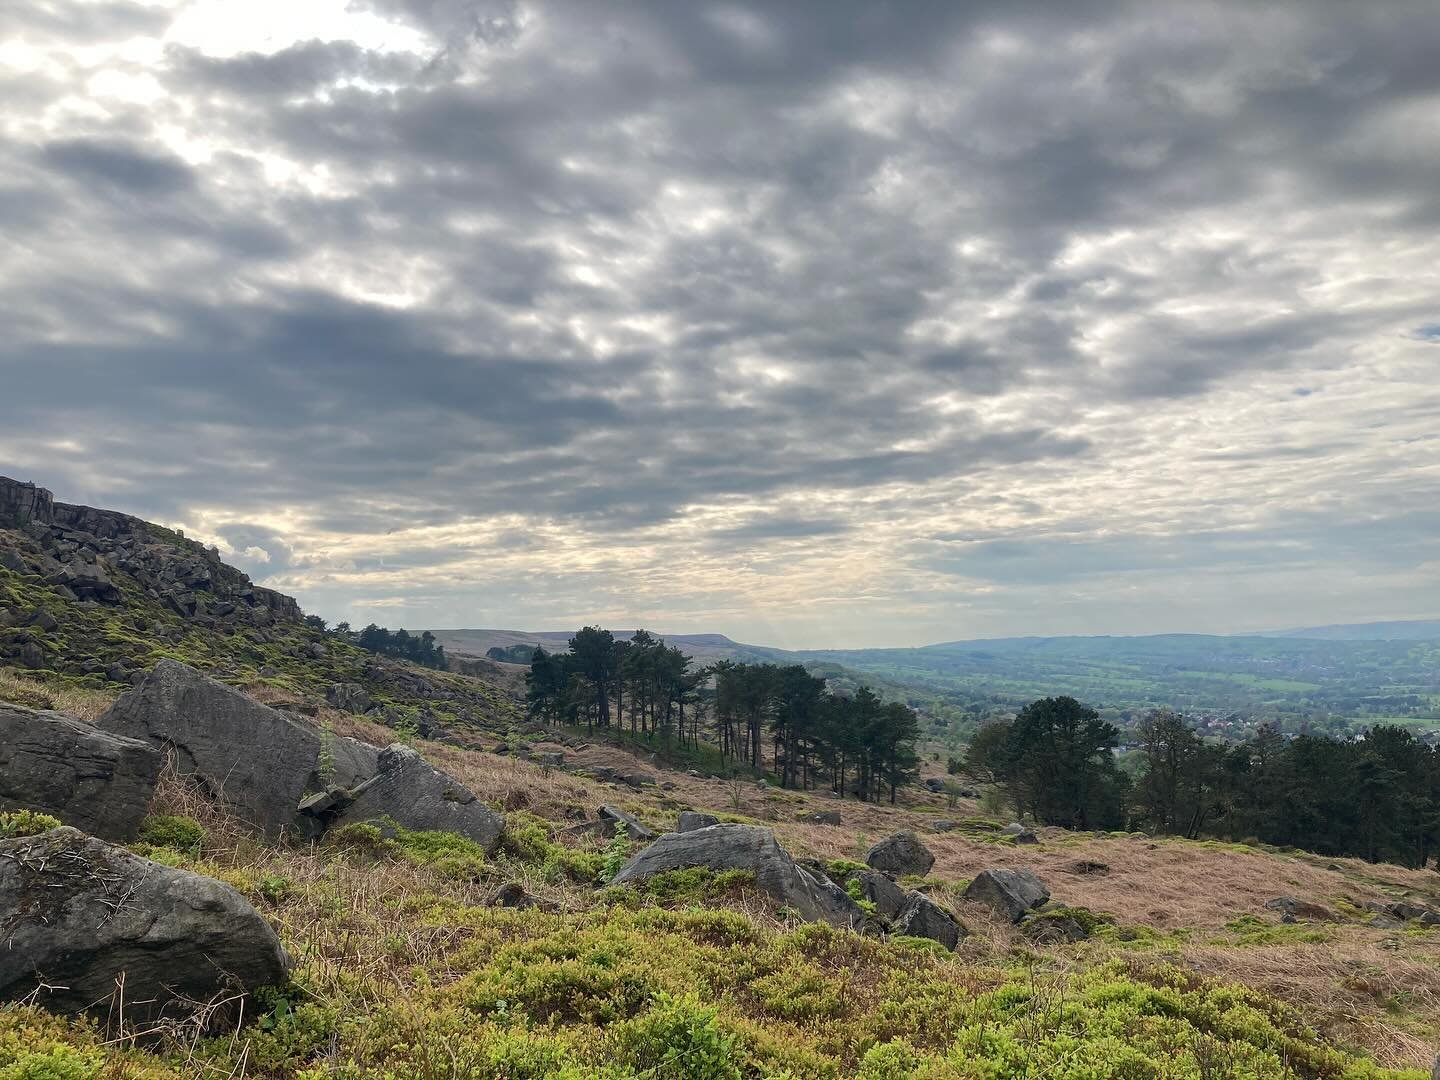 Ilkley Moor at its finest 💚🤎💜